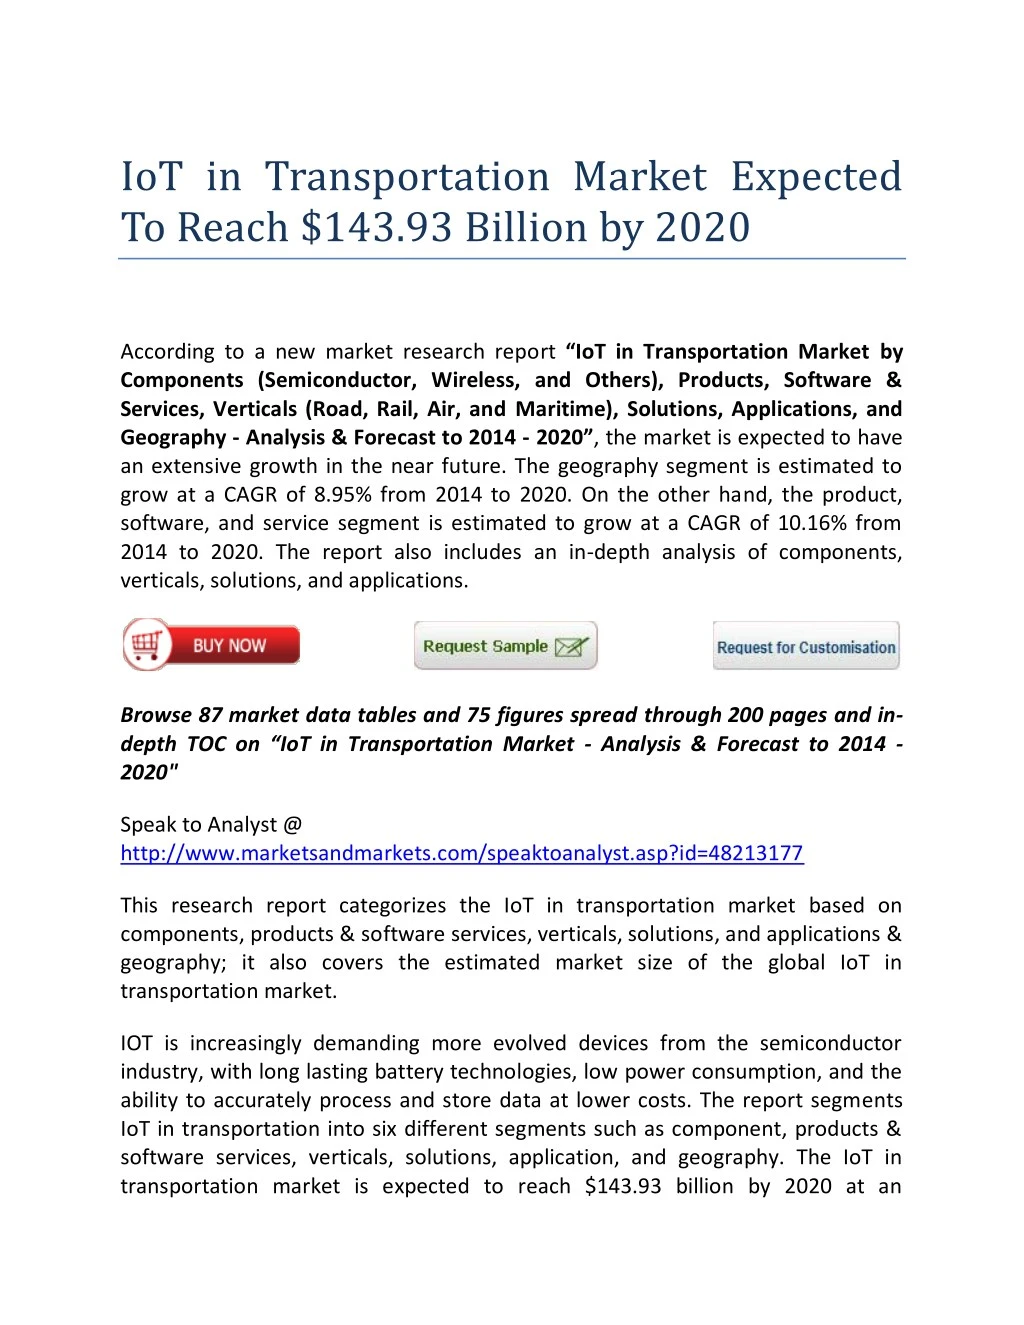 iot in transportation market expected to reach